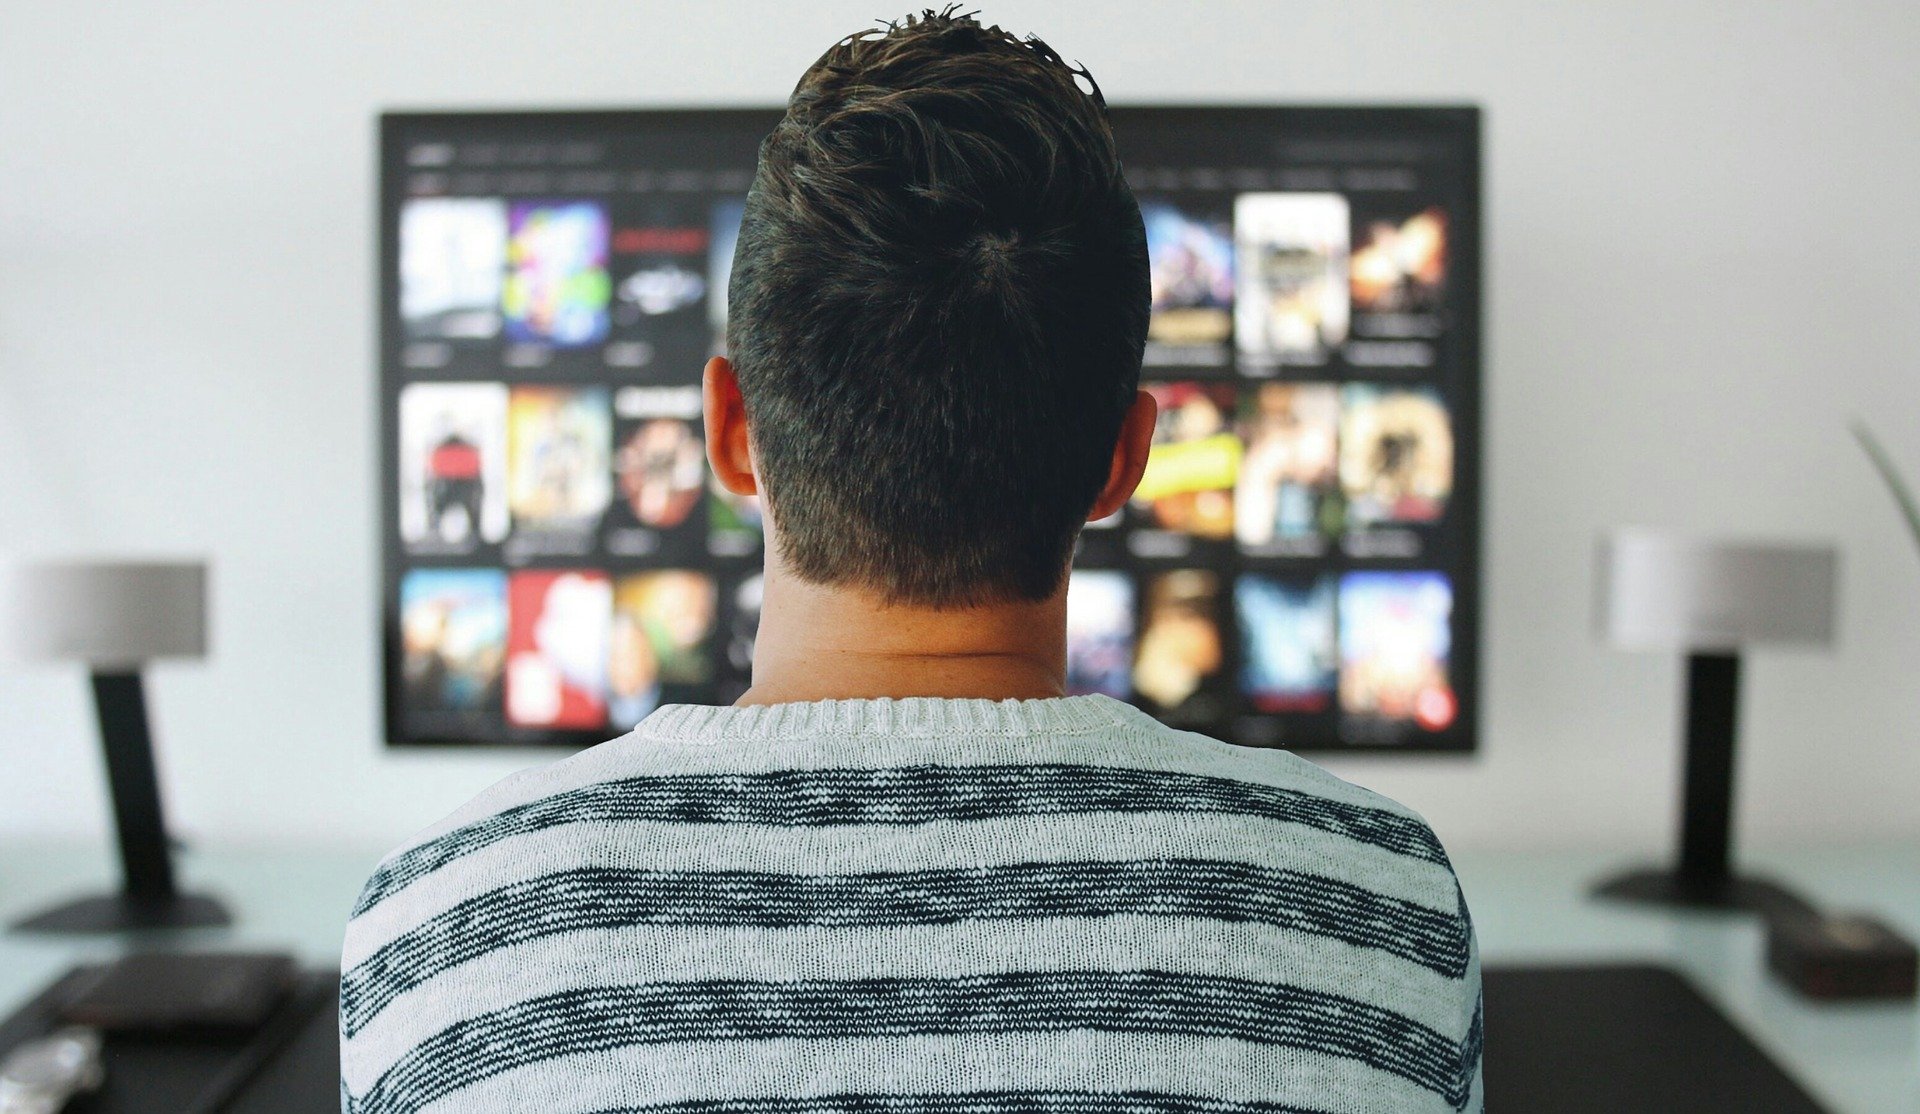 VOD subscriptions to hit 2bn by 2025, suggests new research